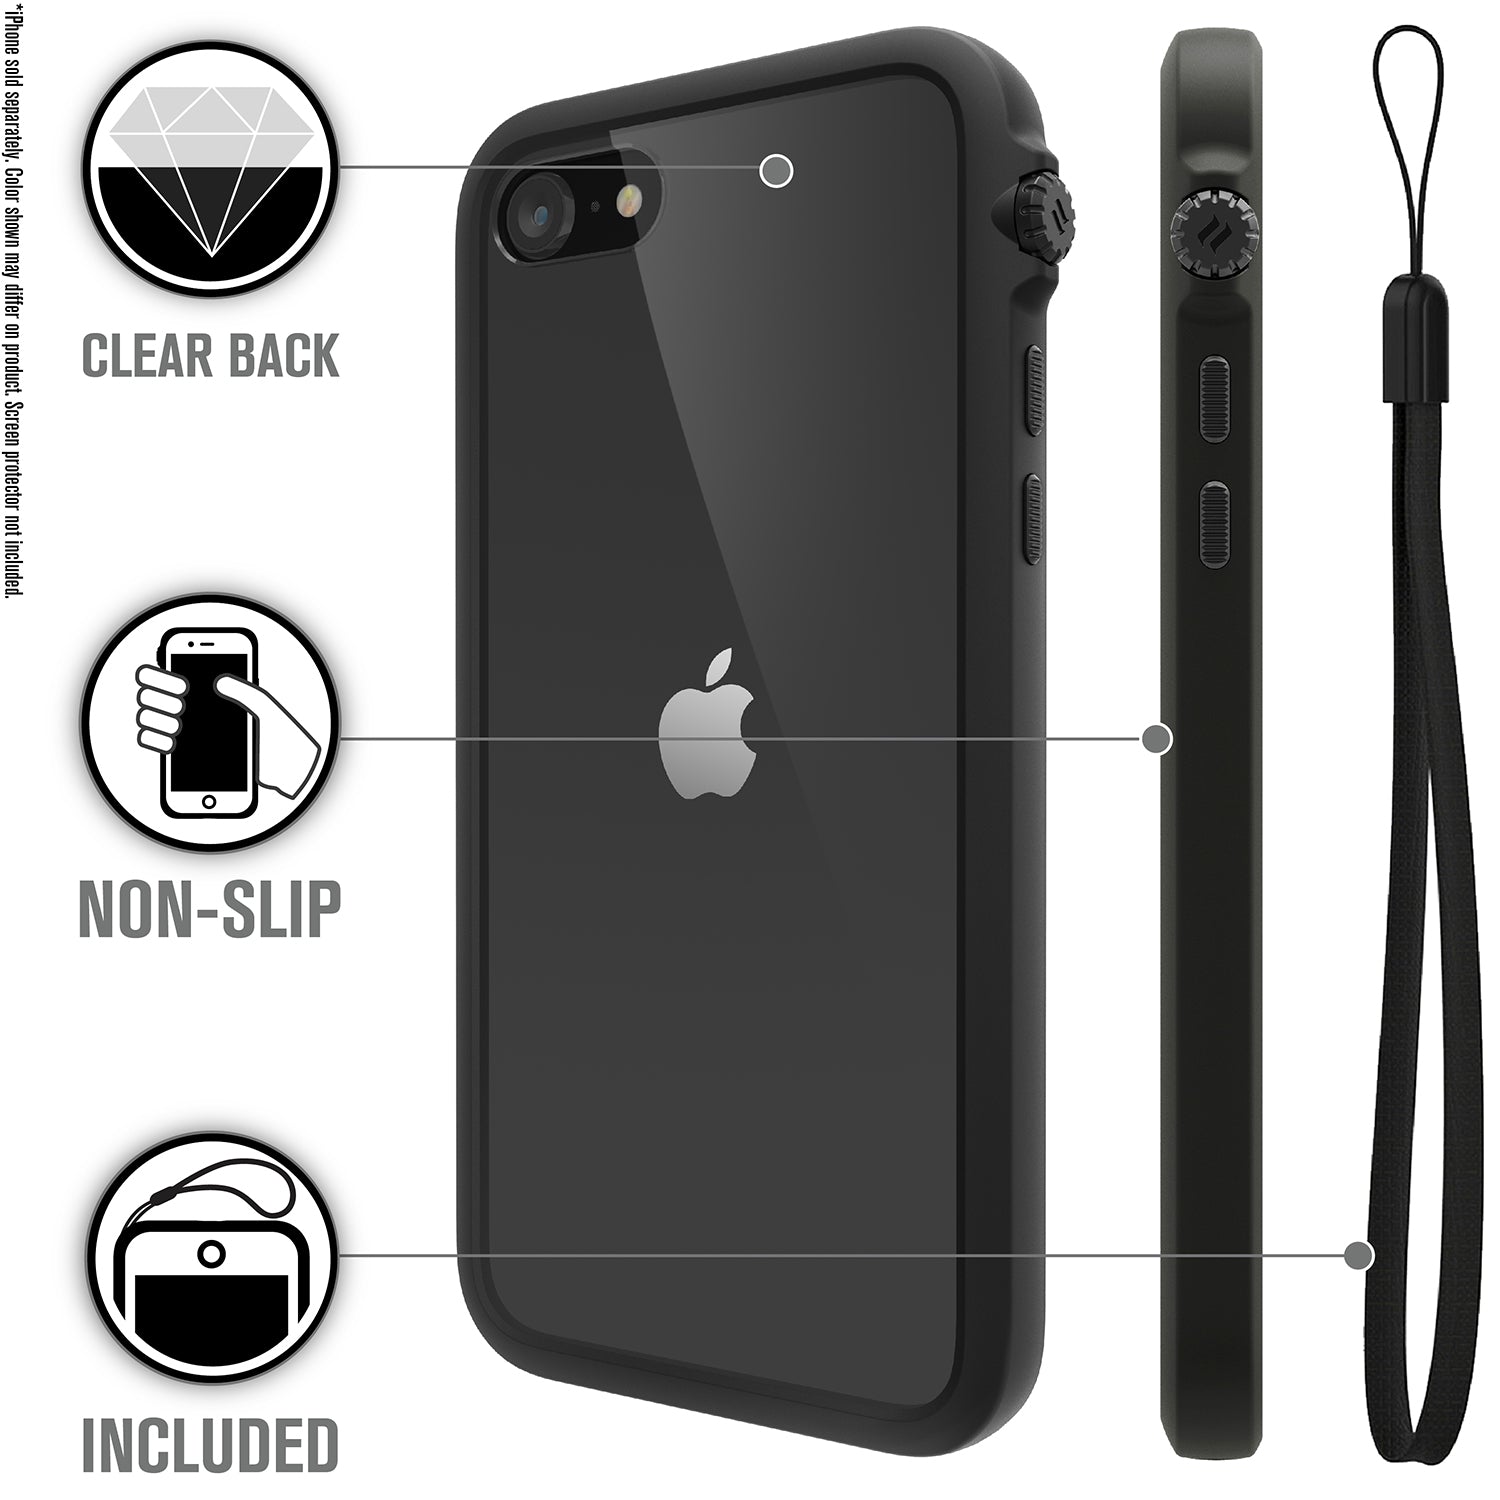 Catalyst iphone 8/7 impact protection case showing the case features with lanyard in a stealth black colorway text reads clear back non-slip included 